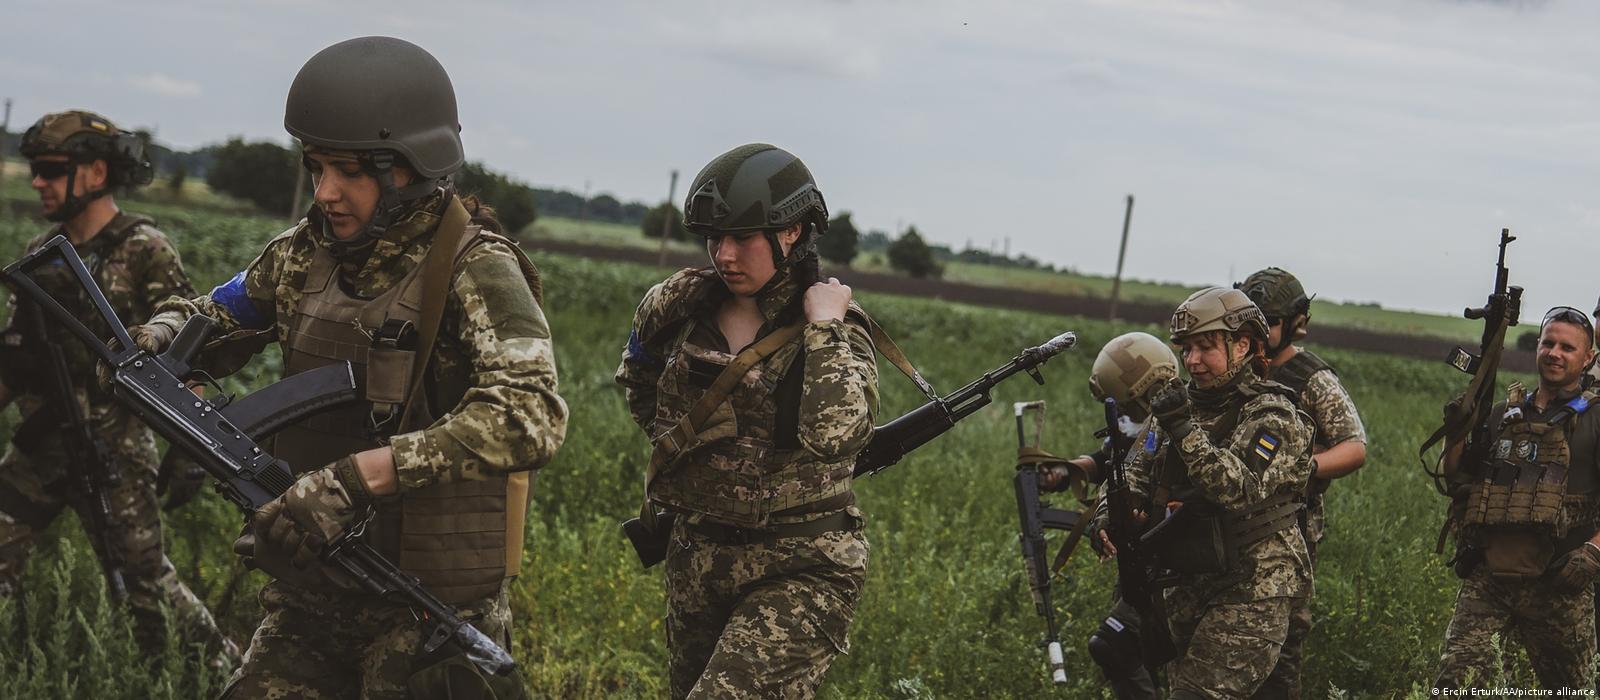 UA POV - Women in Ukraine are training for combat as the country faces a  dearth of troops - DW News : r/UkraineRussiaReport